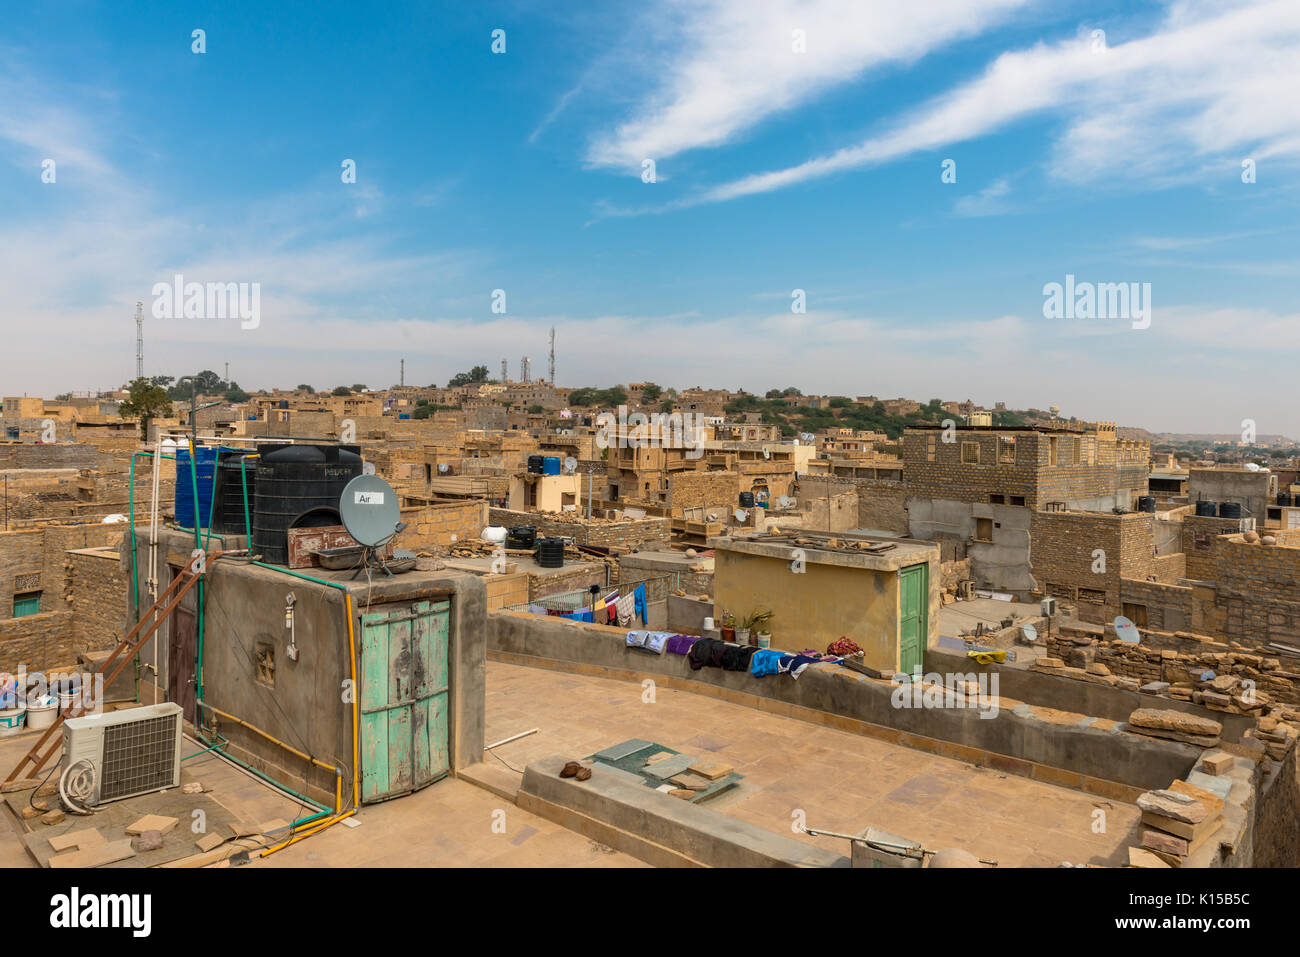 JAISALMER, RAJASTHAN, INDIA - MARCH 07, 2016: Houses view from Saalam Singh Ki Haweli rooftop, carved yellow sandstone architecture in Jaisalmer, know Stock Photo